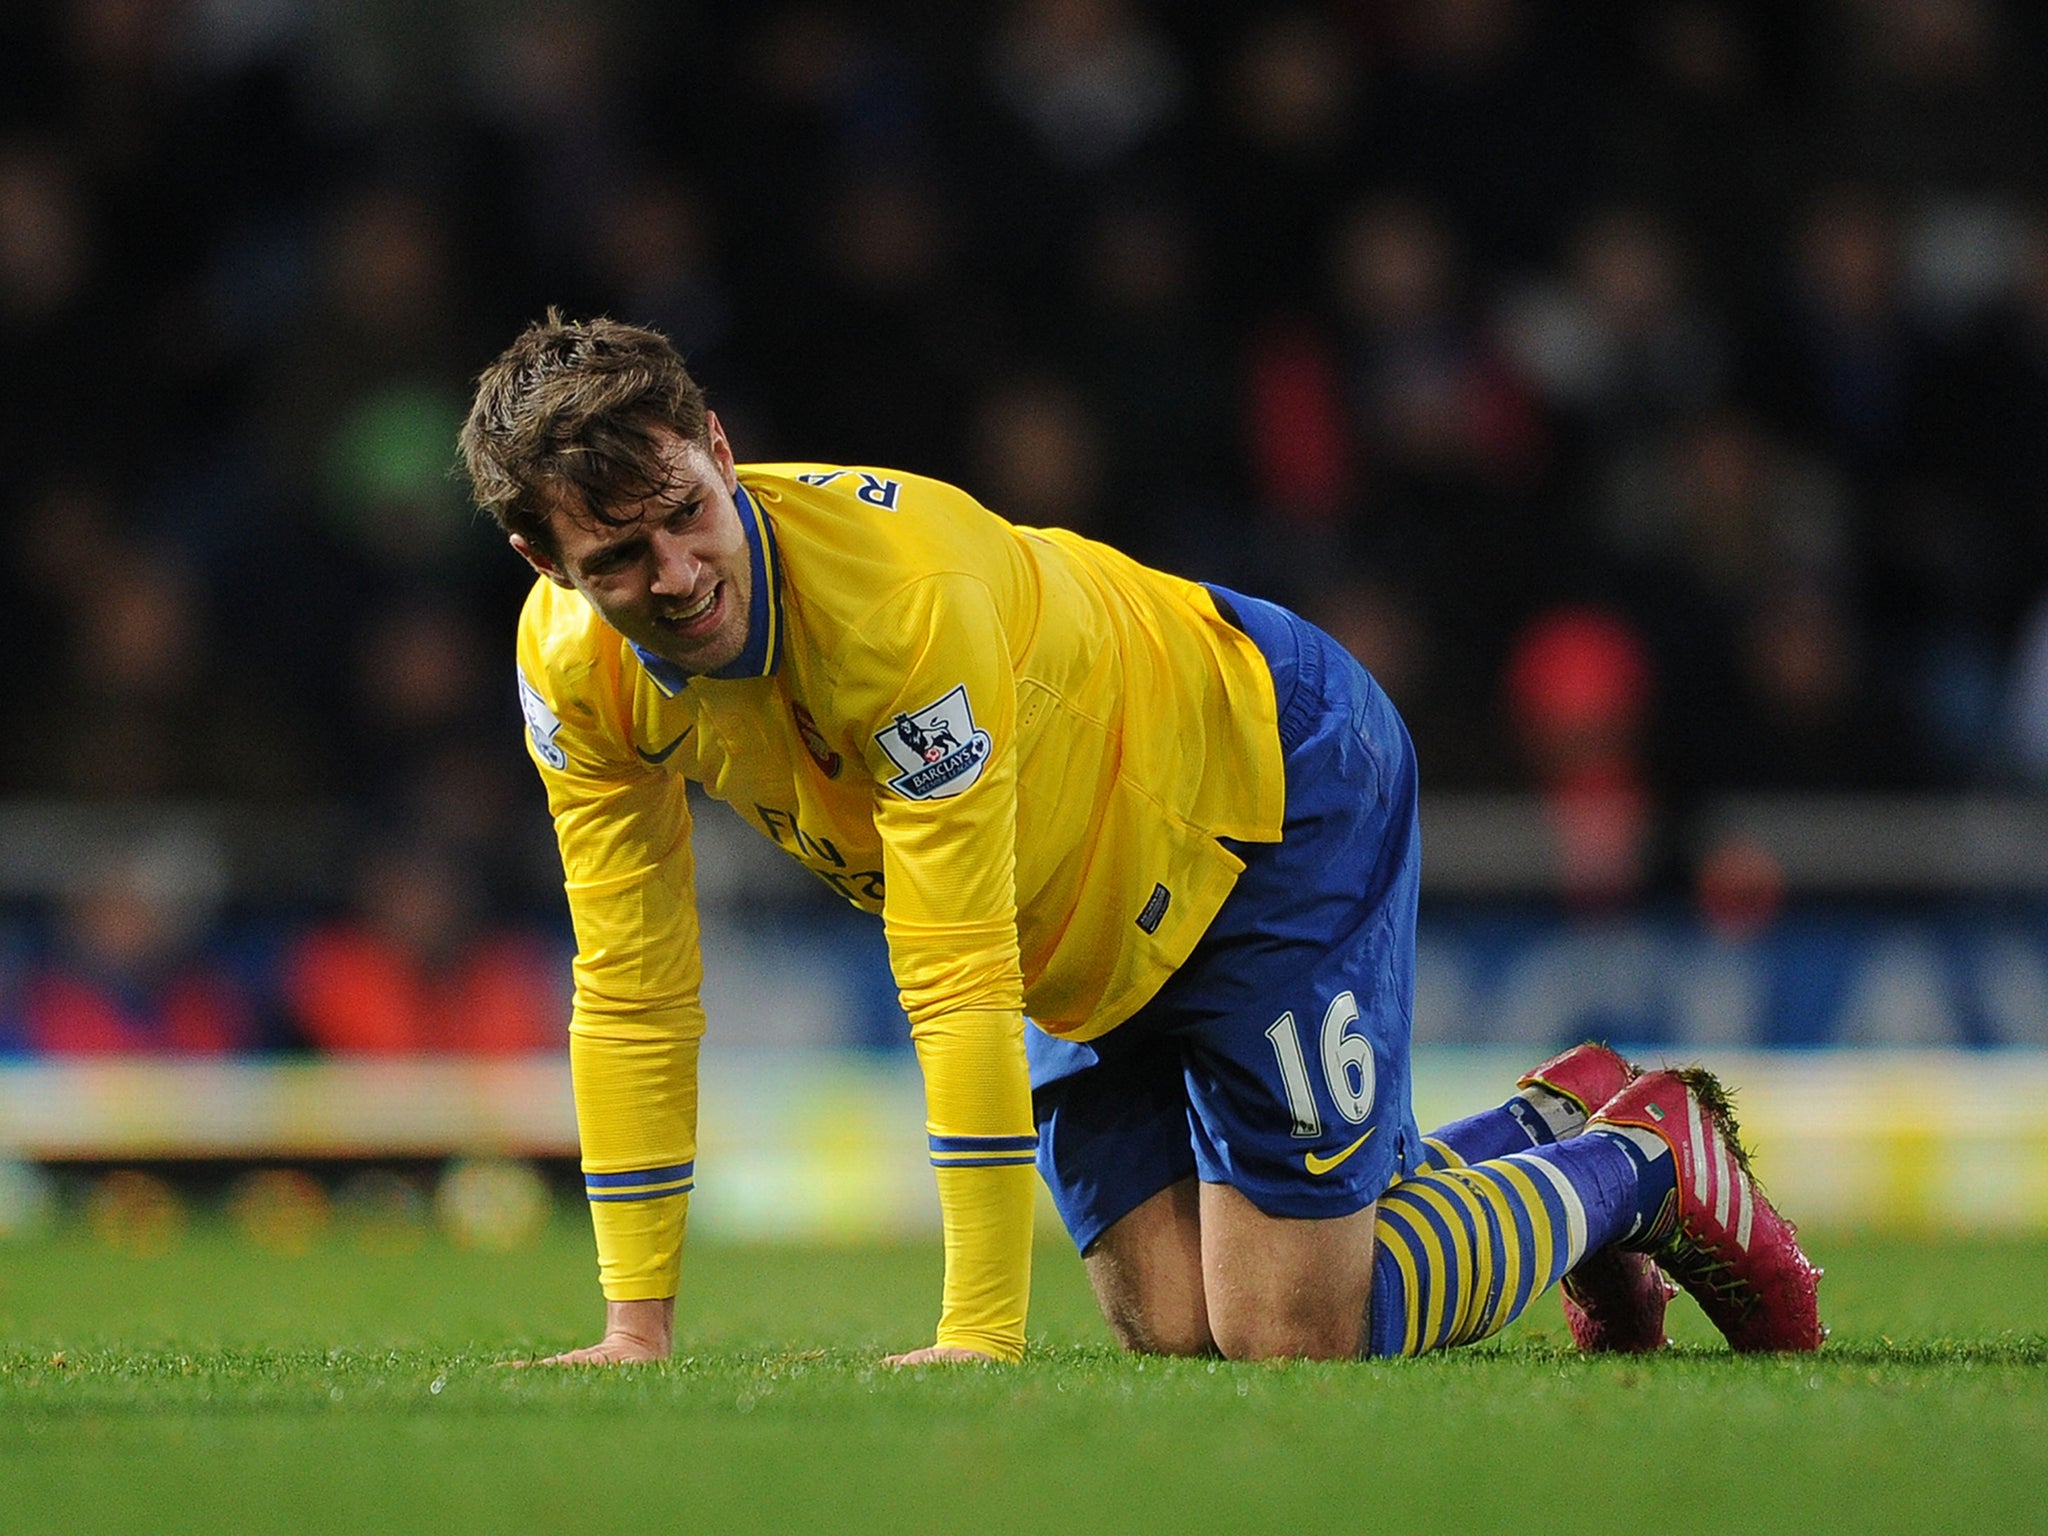 Arsenal midfielder Aaron Ramsey goes down injured in the win at West Ham